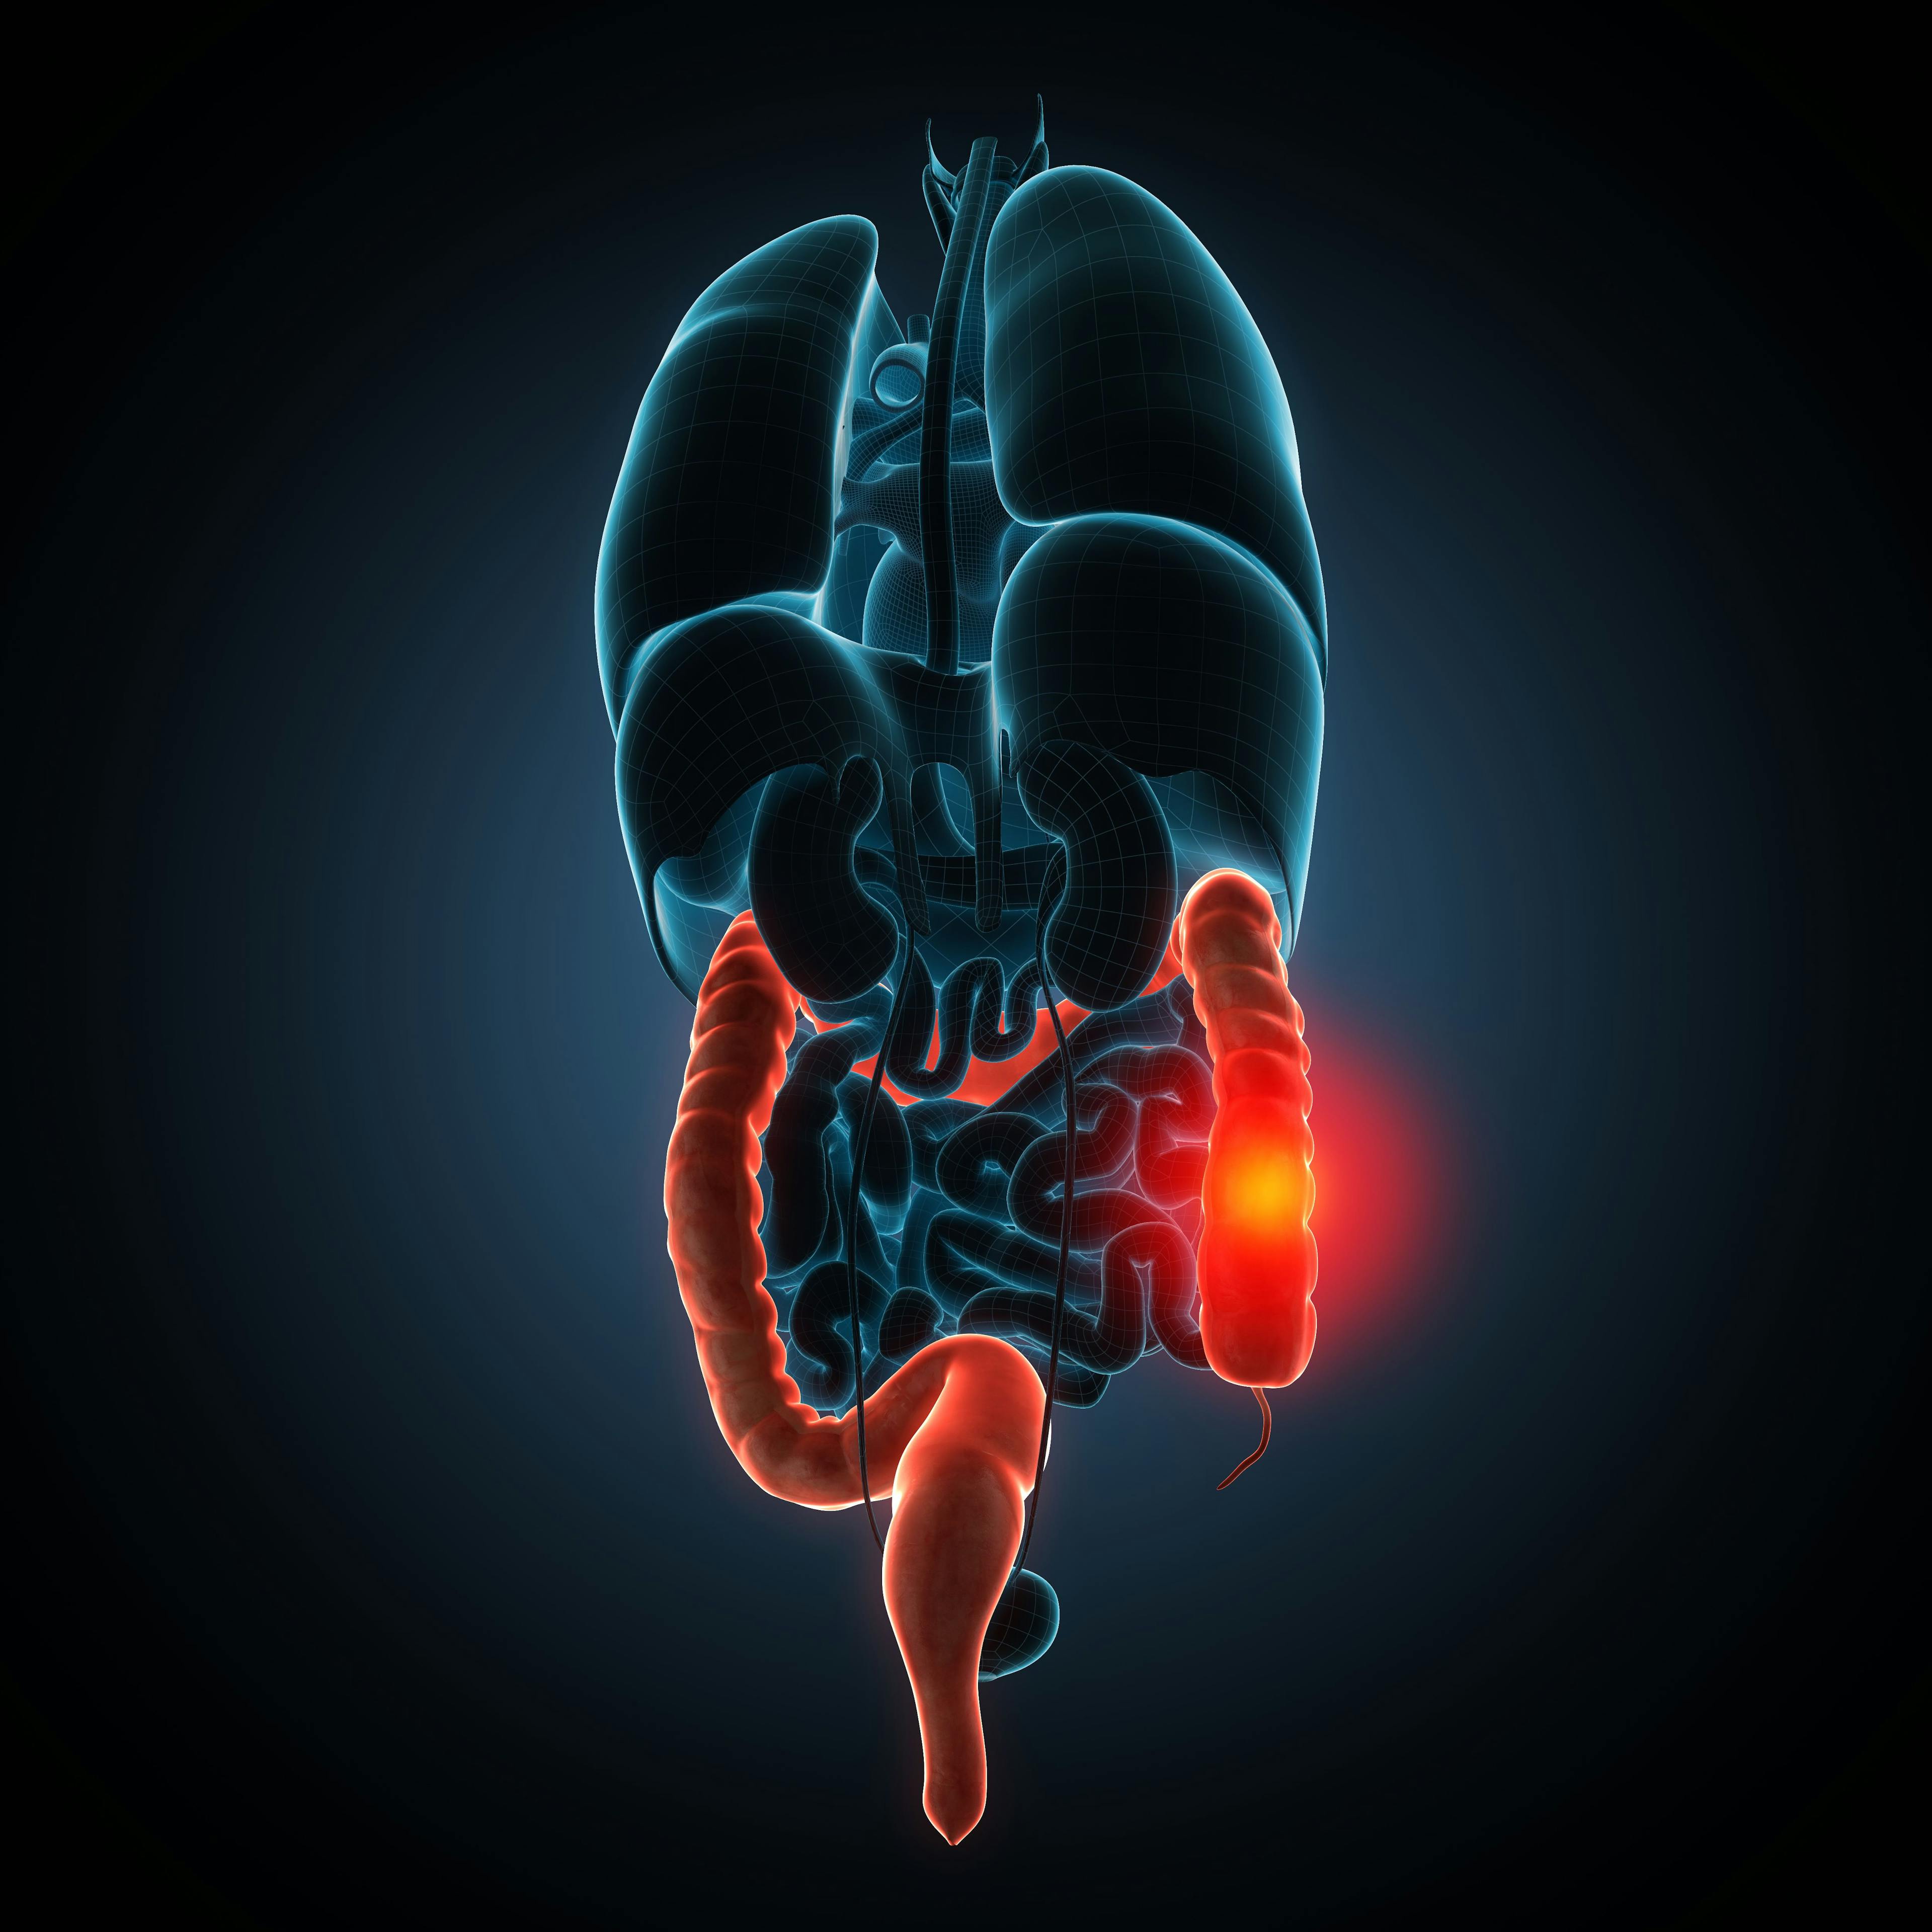 Phase 2 Study Indicates Mirikizumab Induces Mucosal Healing in Patients With Ulcerative Colitis